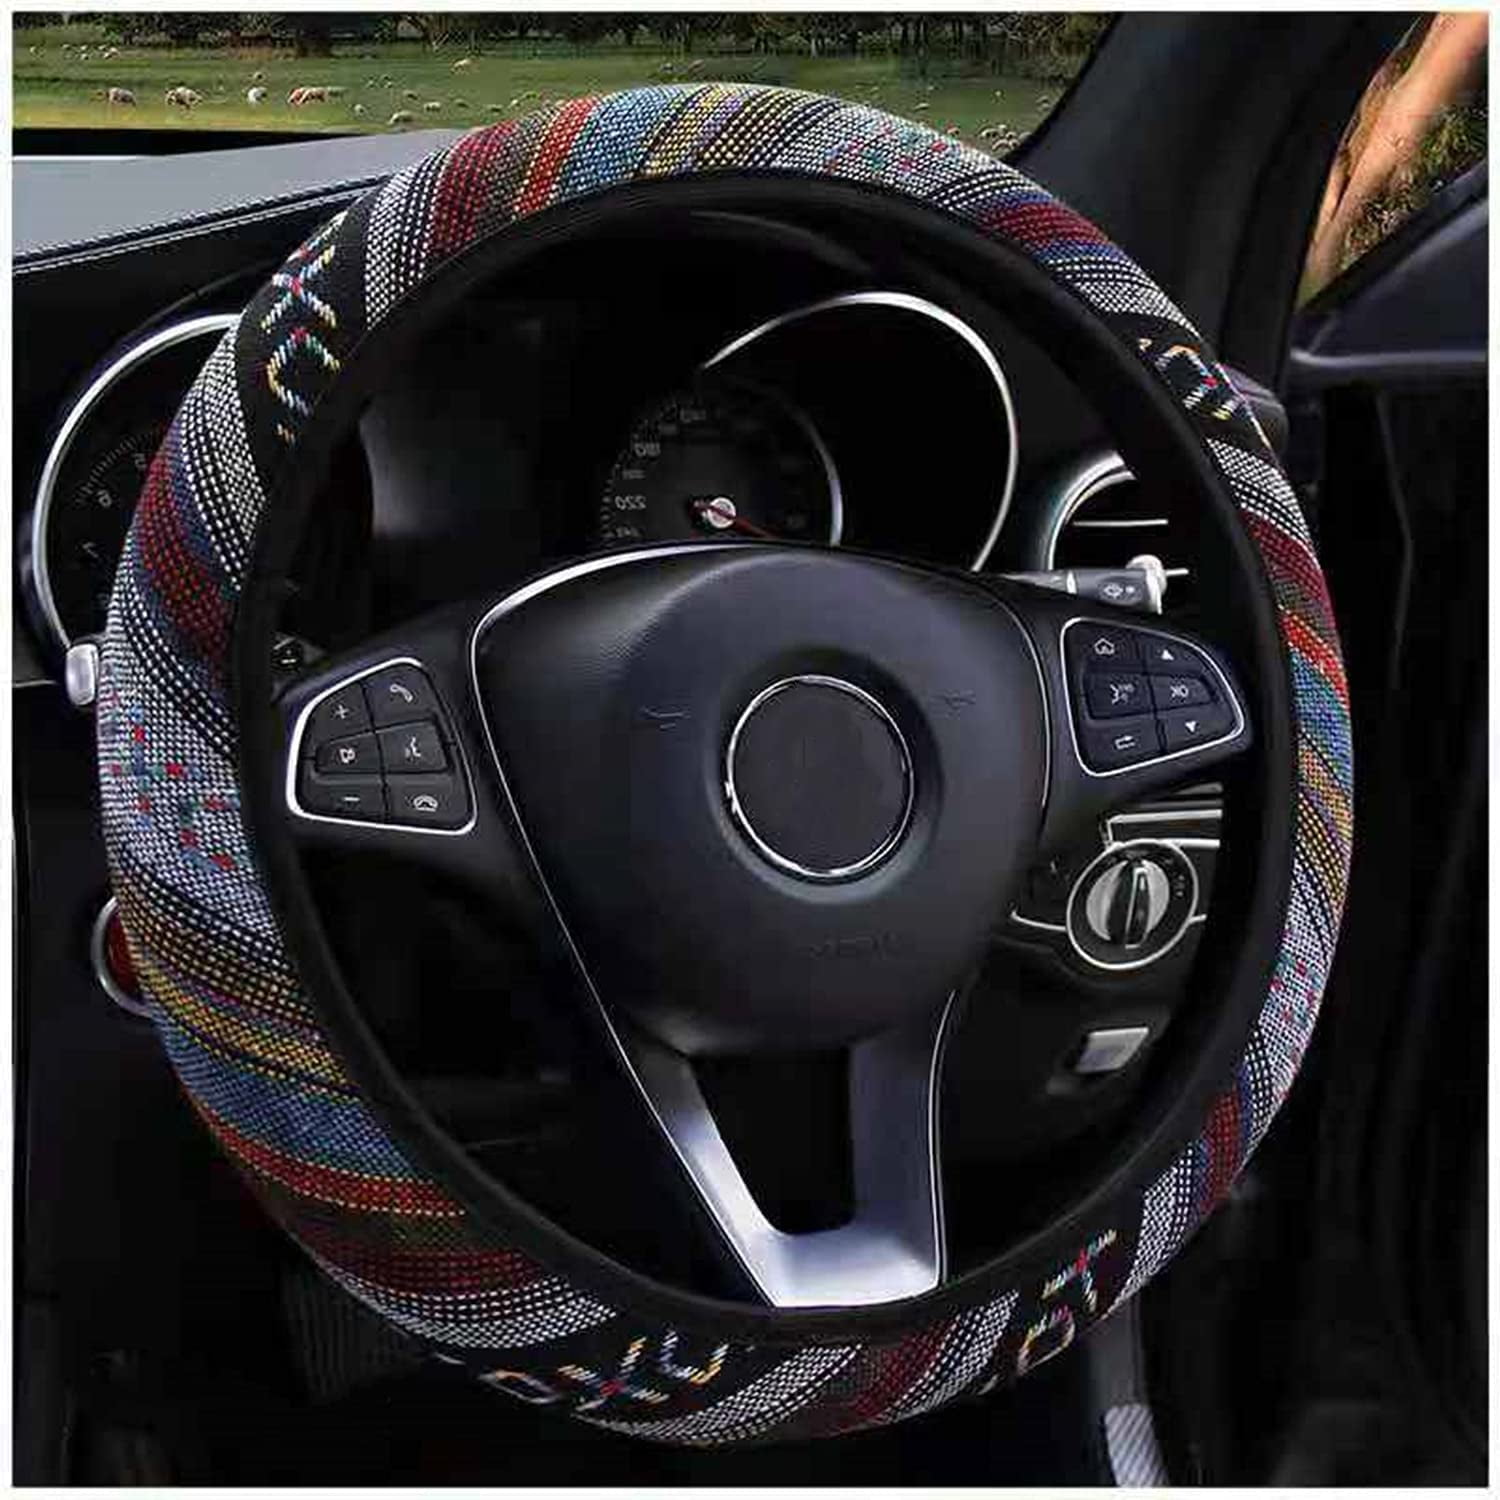 ISTN 2018 Large Ethnic Style Coarse Flax Cloth Automotive Steering Wheel Cover Anti Slip and Sweat Absorption Auto Car Wrap Cover 